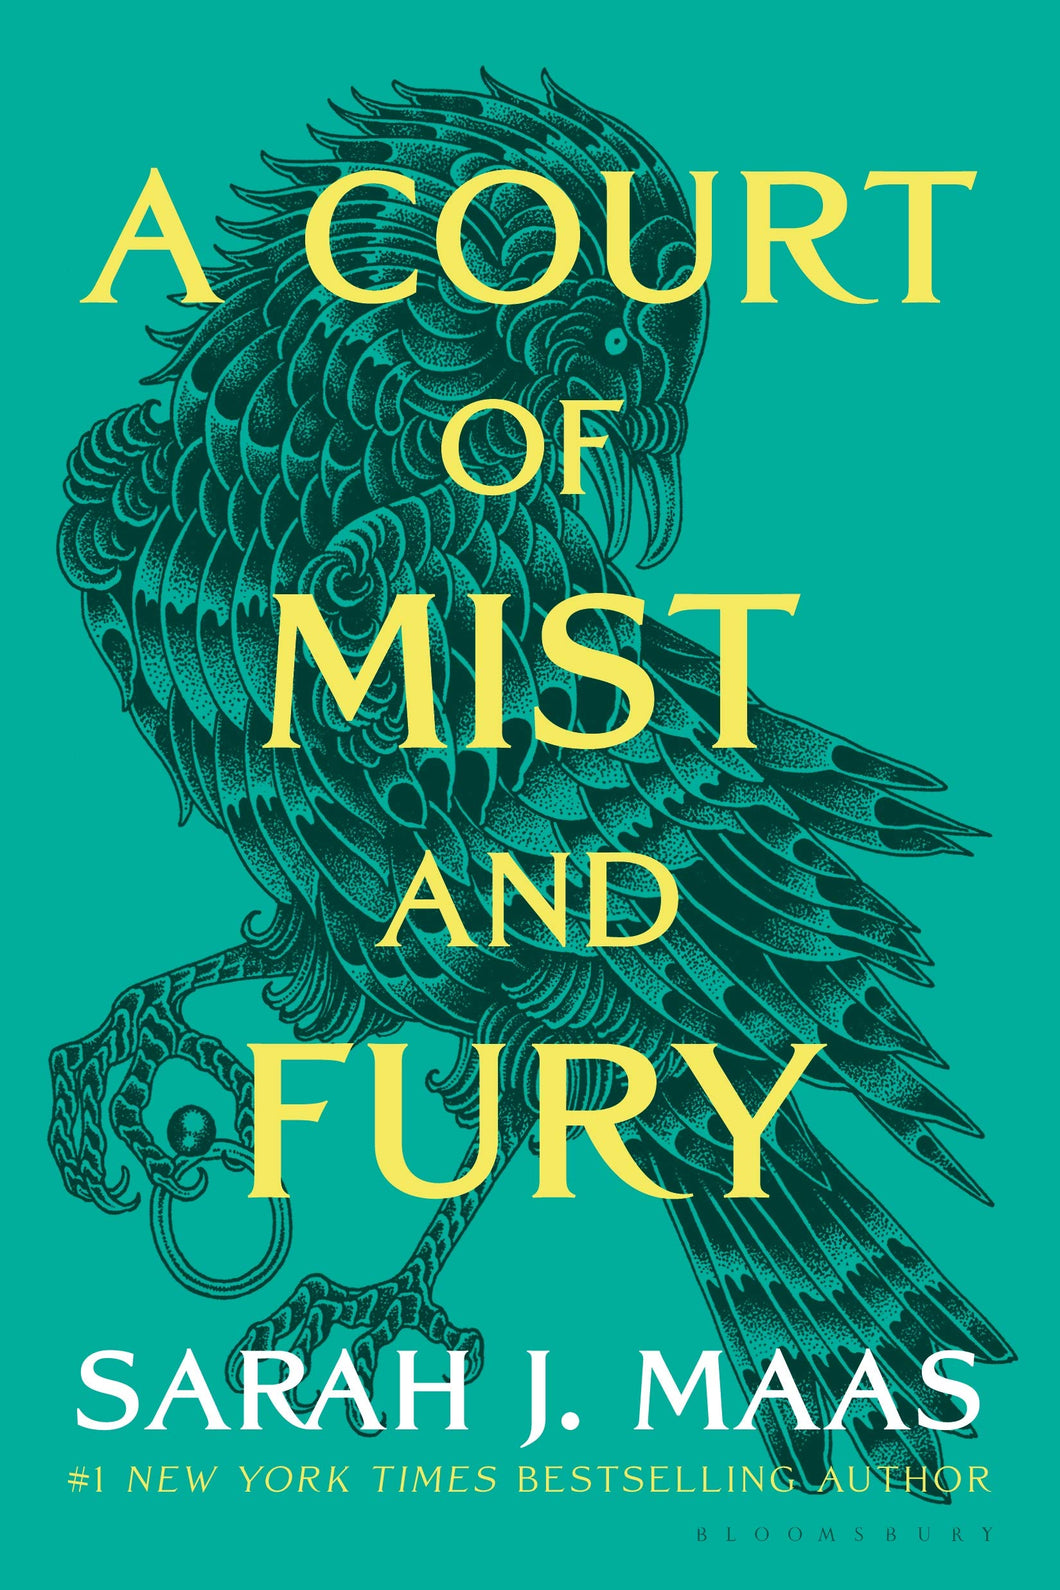 A Court of Thorns and Roses Book 2: A Court of Mist and Fury  by Sarah J. Maas